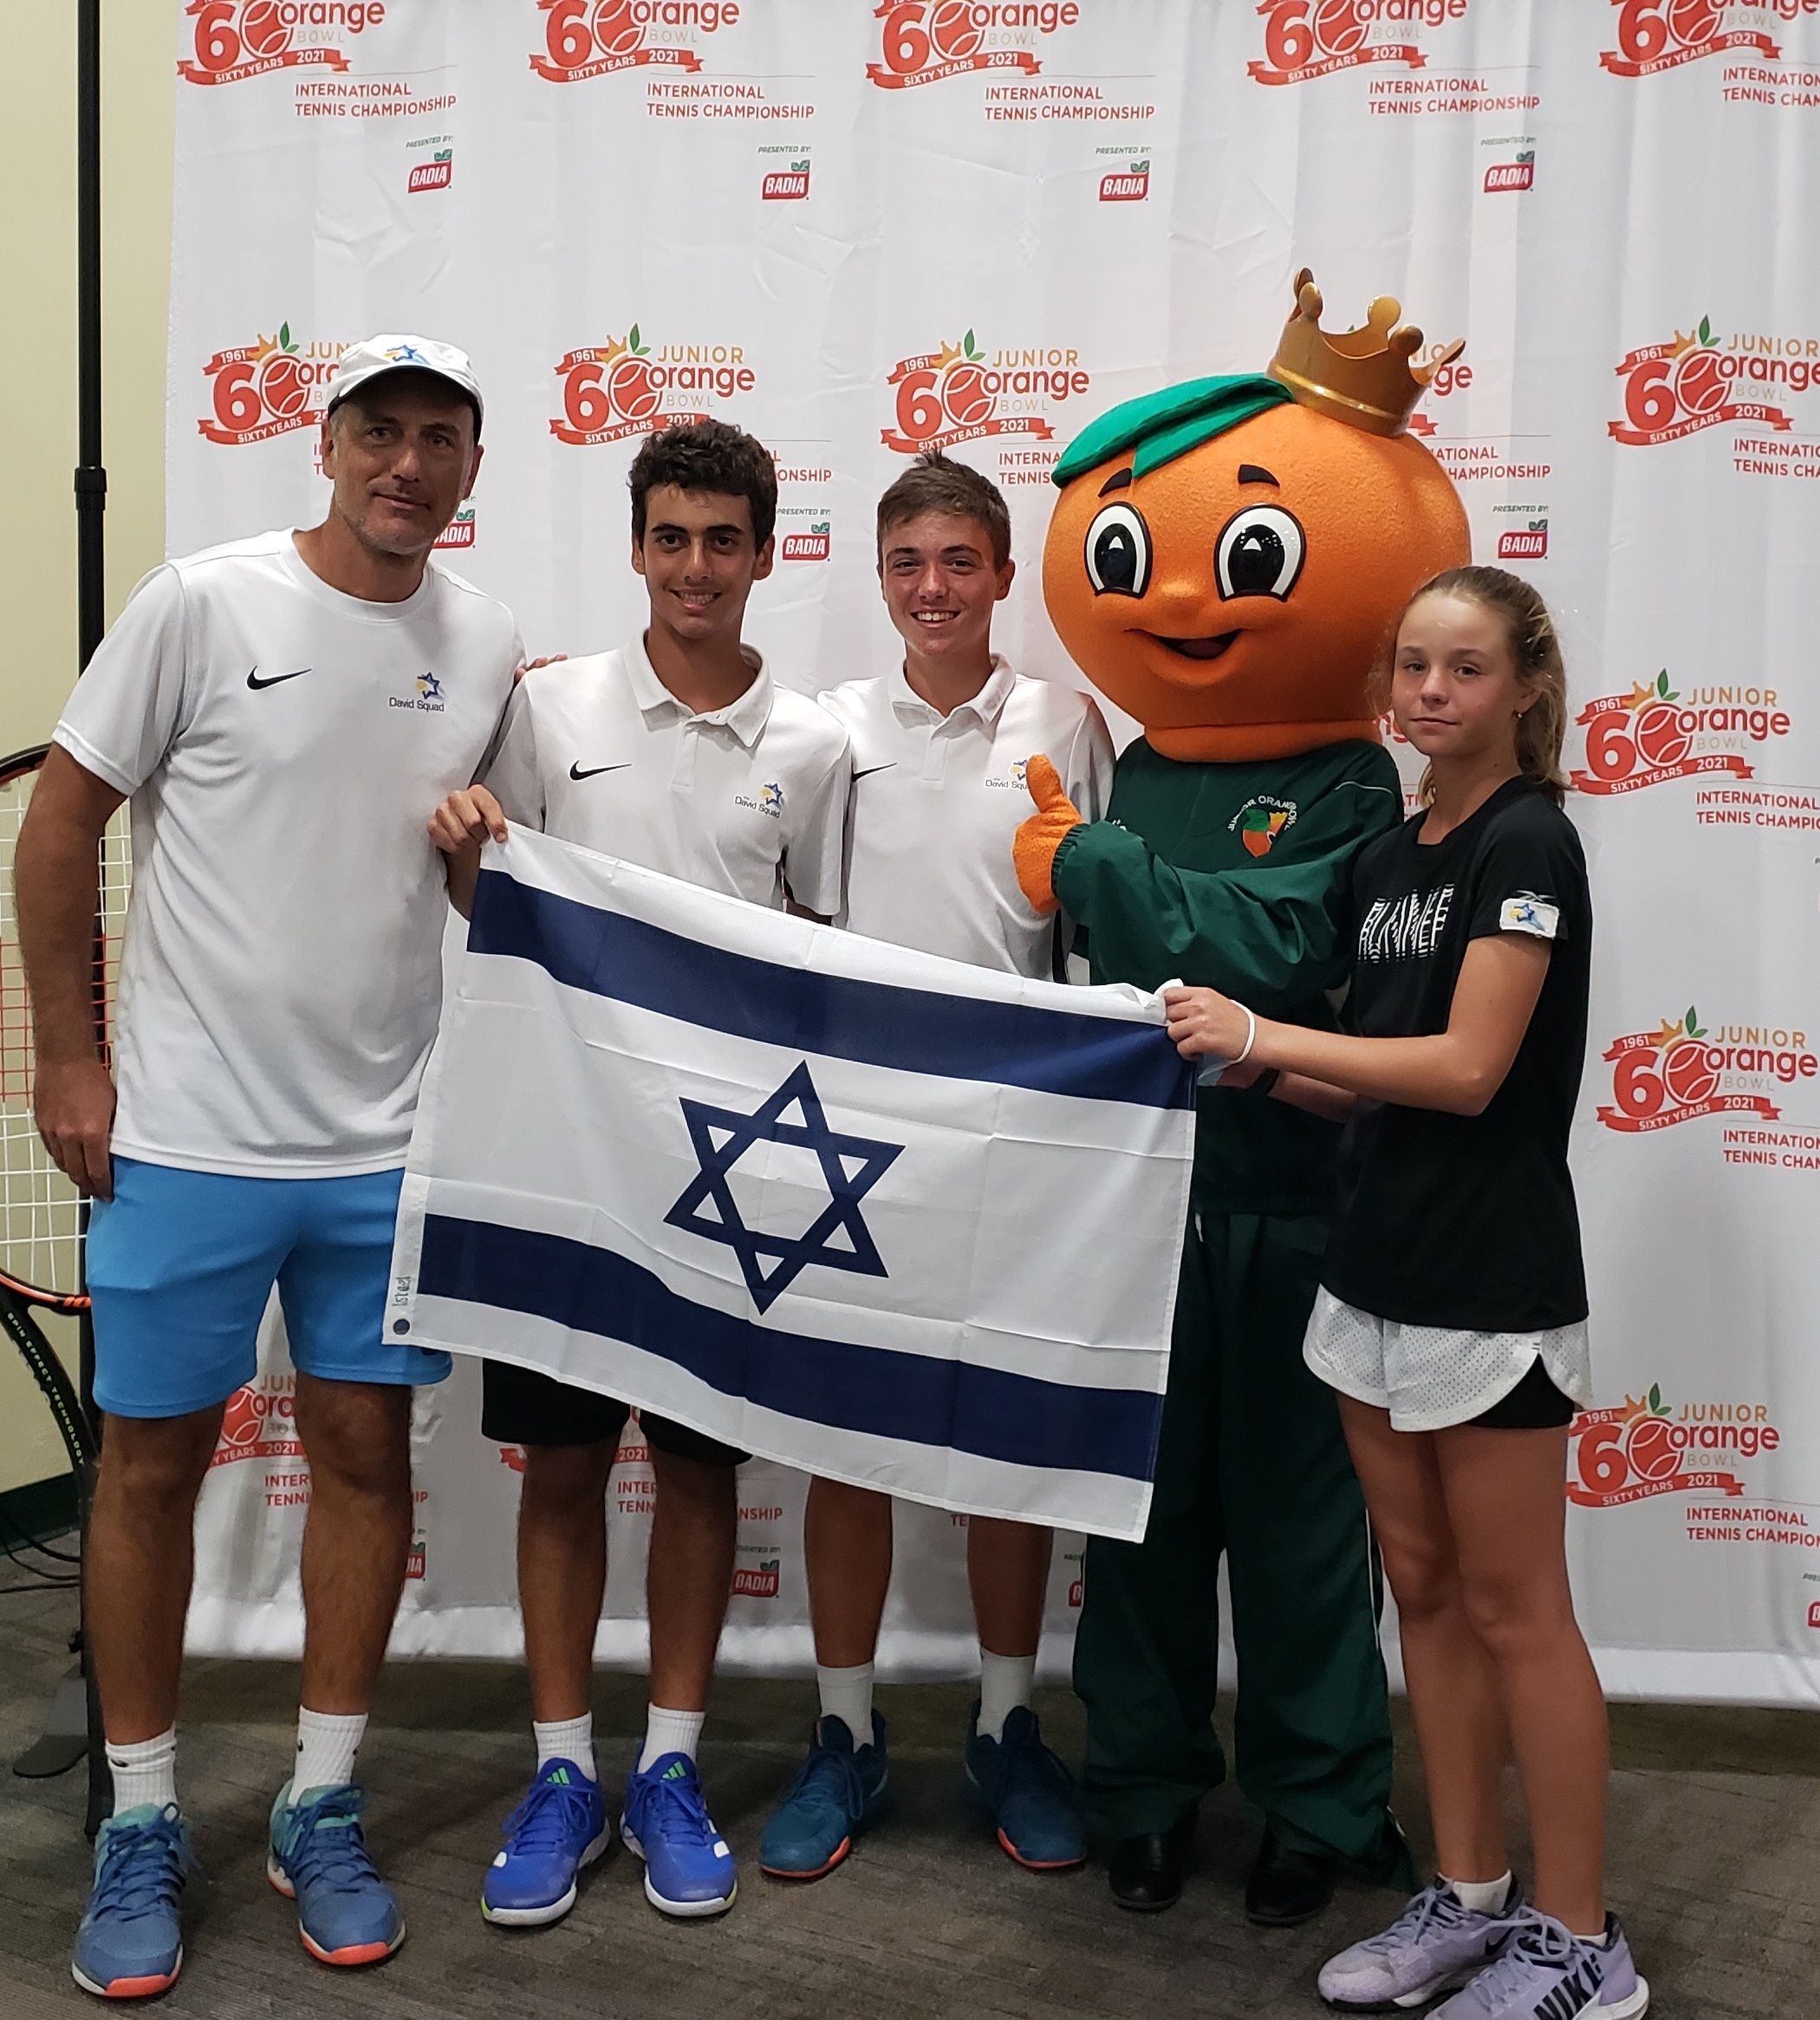 The Best Young Junior Tennis Players Check in for Championship